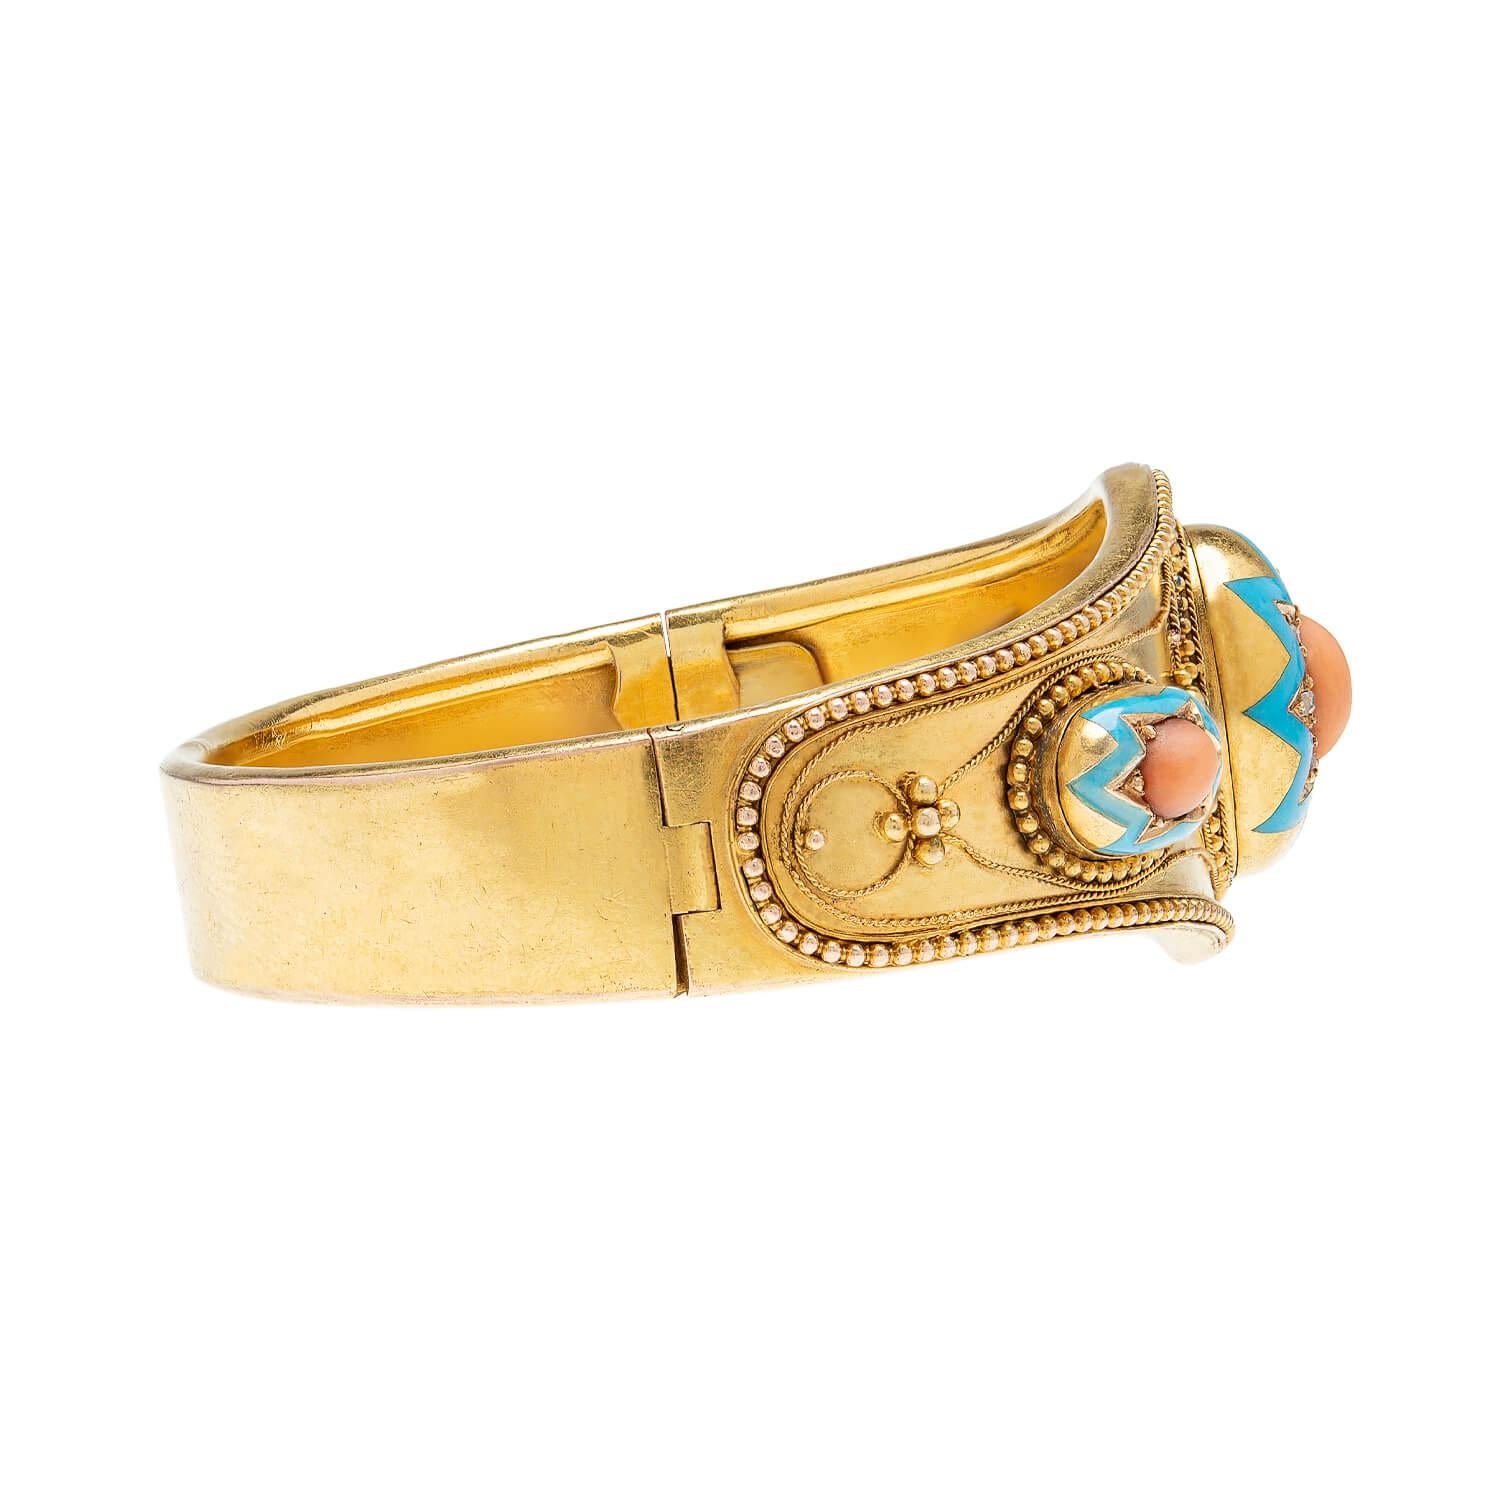 A beautiful and unusual bangle bracelet from the Victorian (ca1880) period! Crafted in 15k gold (indicating English origin), this fabulous piece has a very eye-catching design. Three raised domes decorate the front, each with a starburst motif set